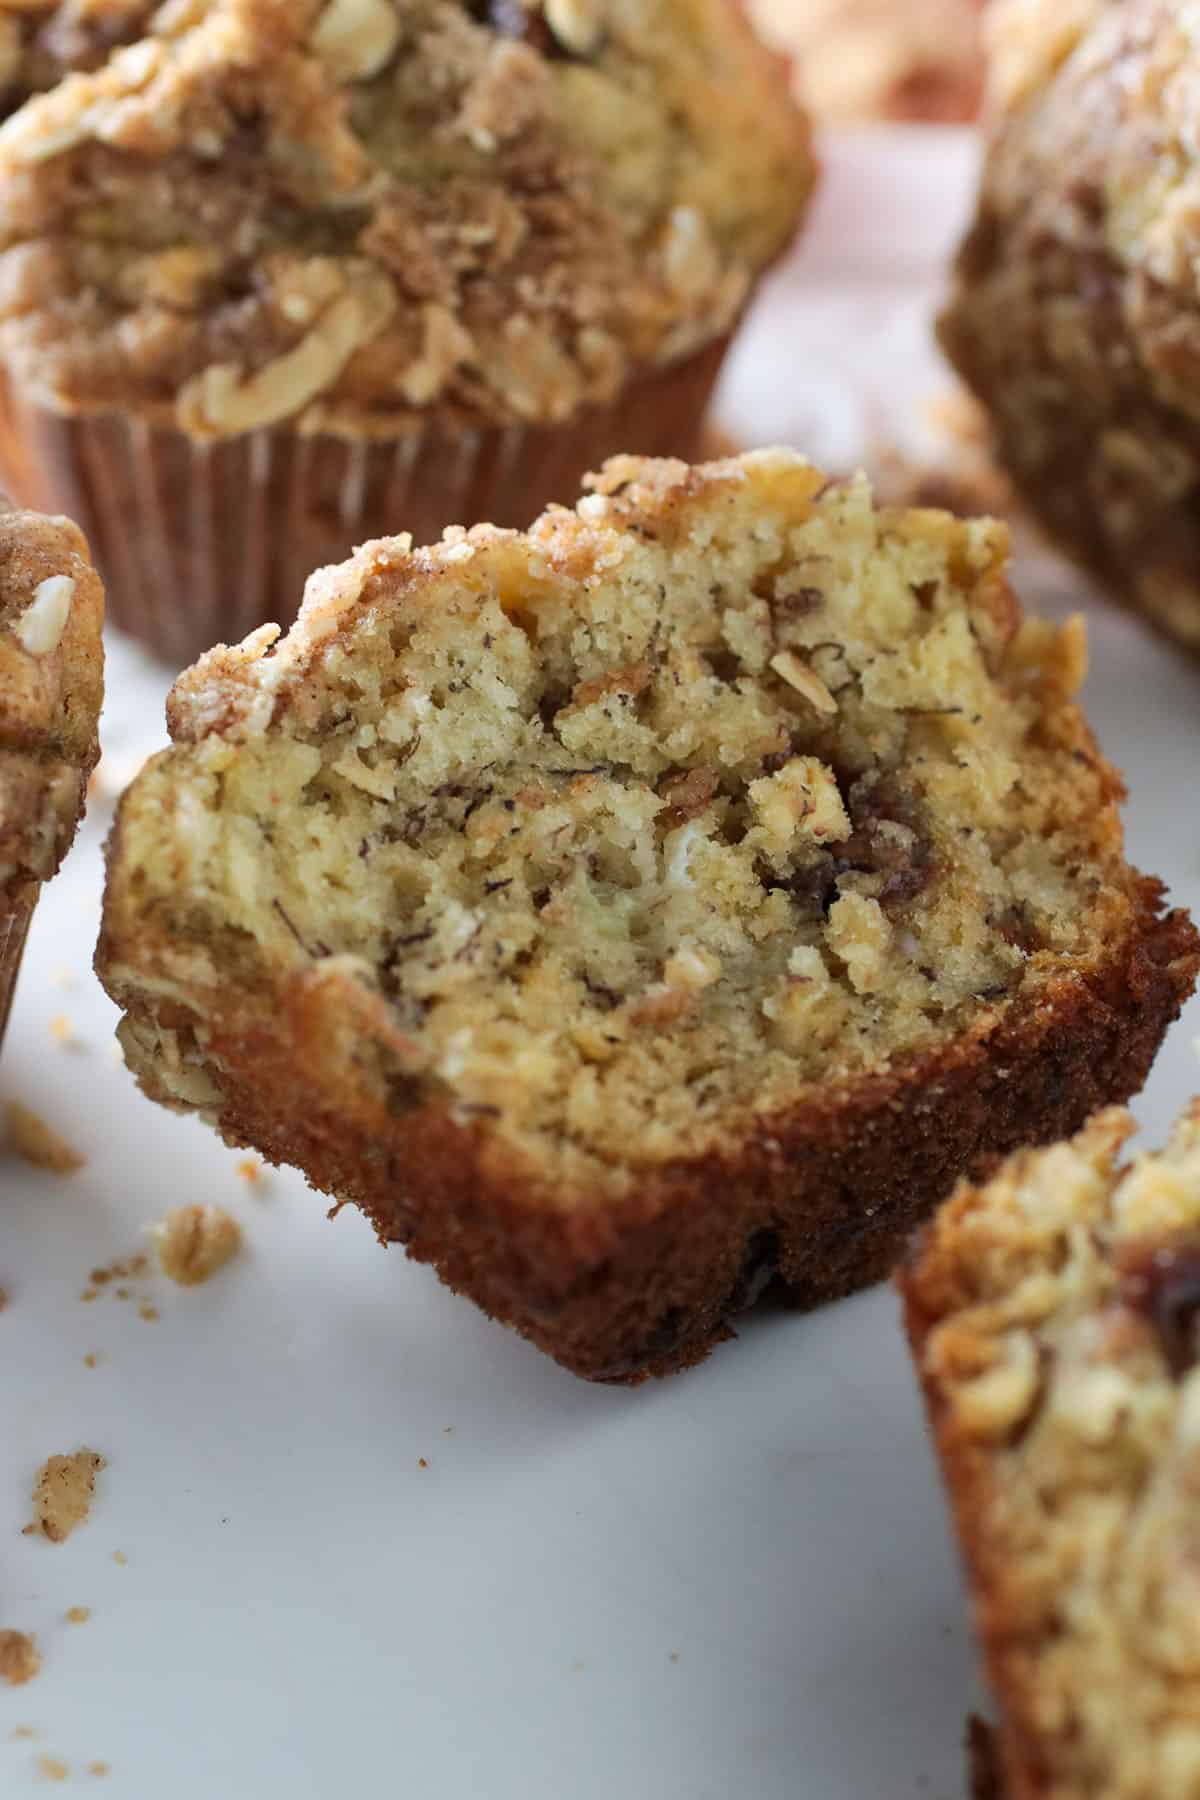 A Banana Chocolate Chip Oatmeal Muffin, sliced in half to show the crumbs.